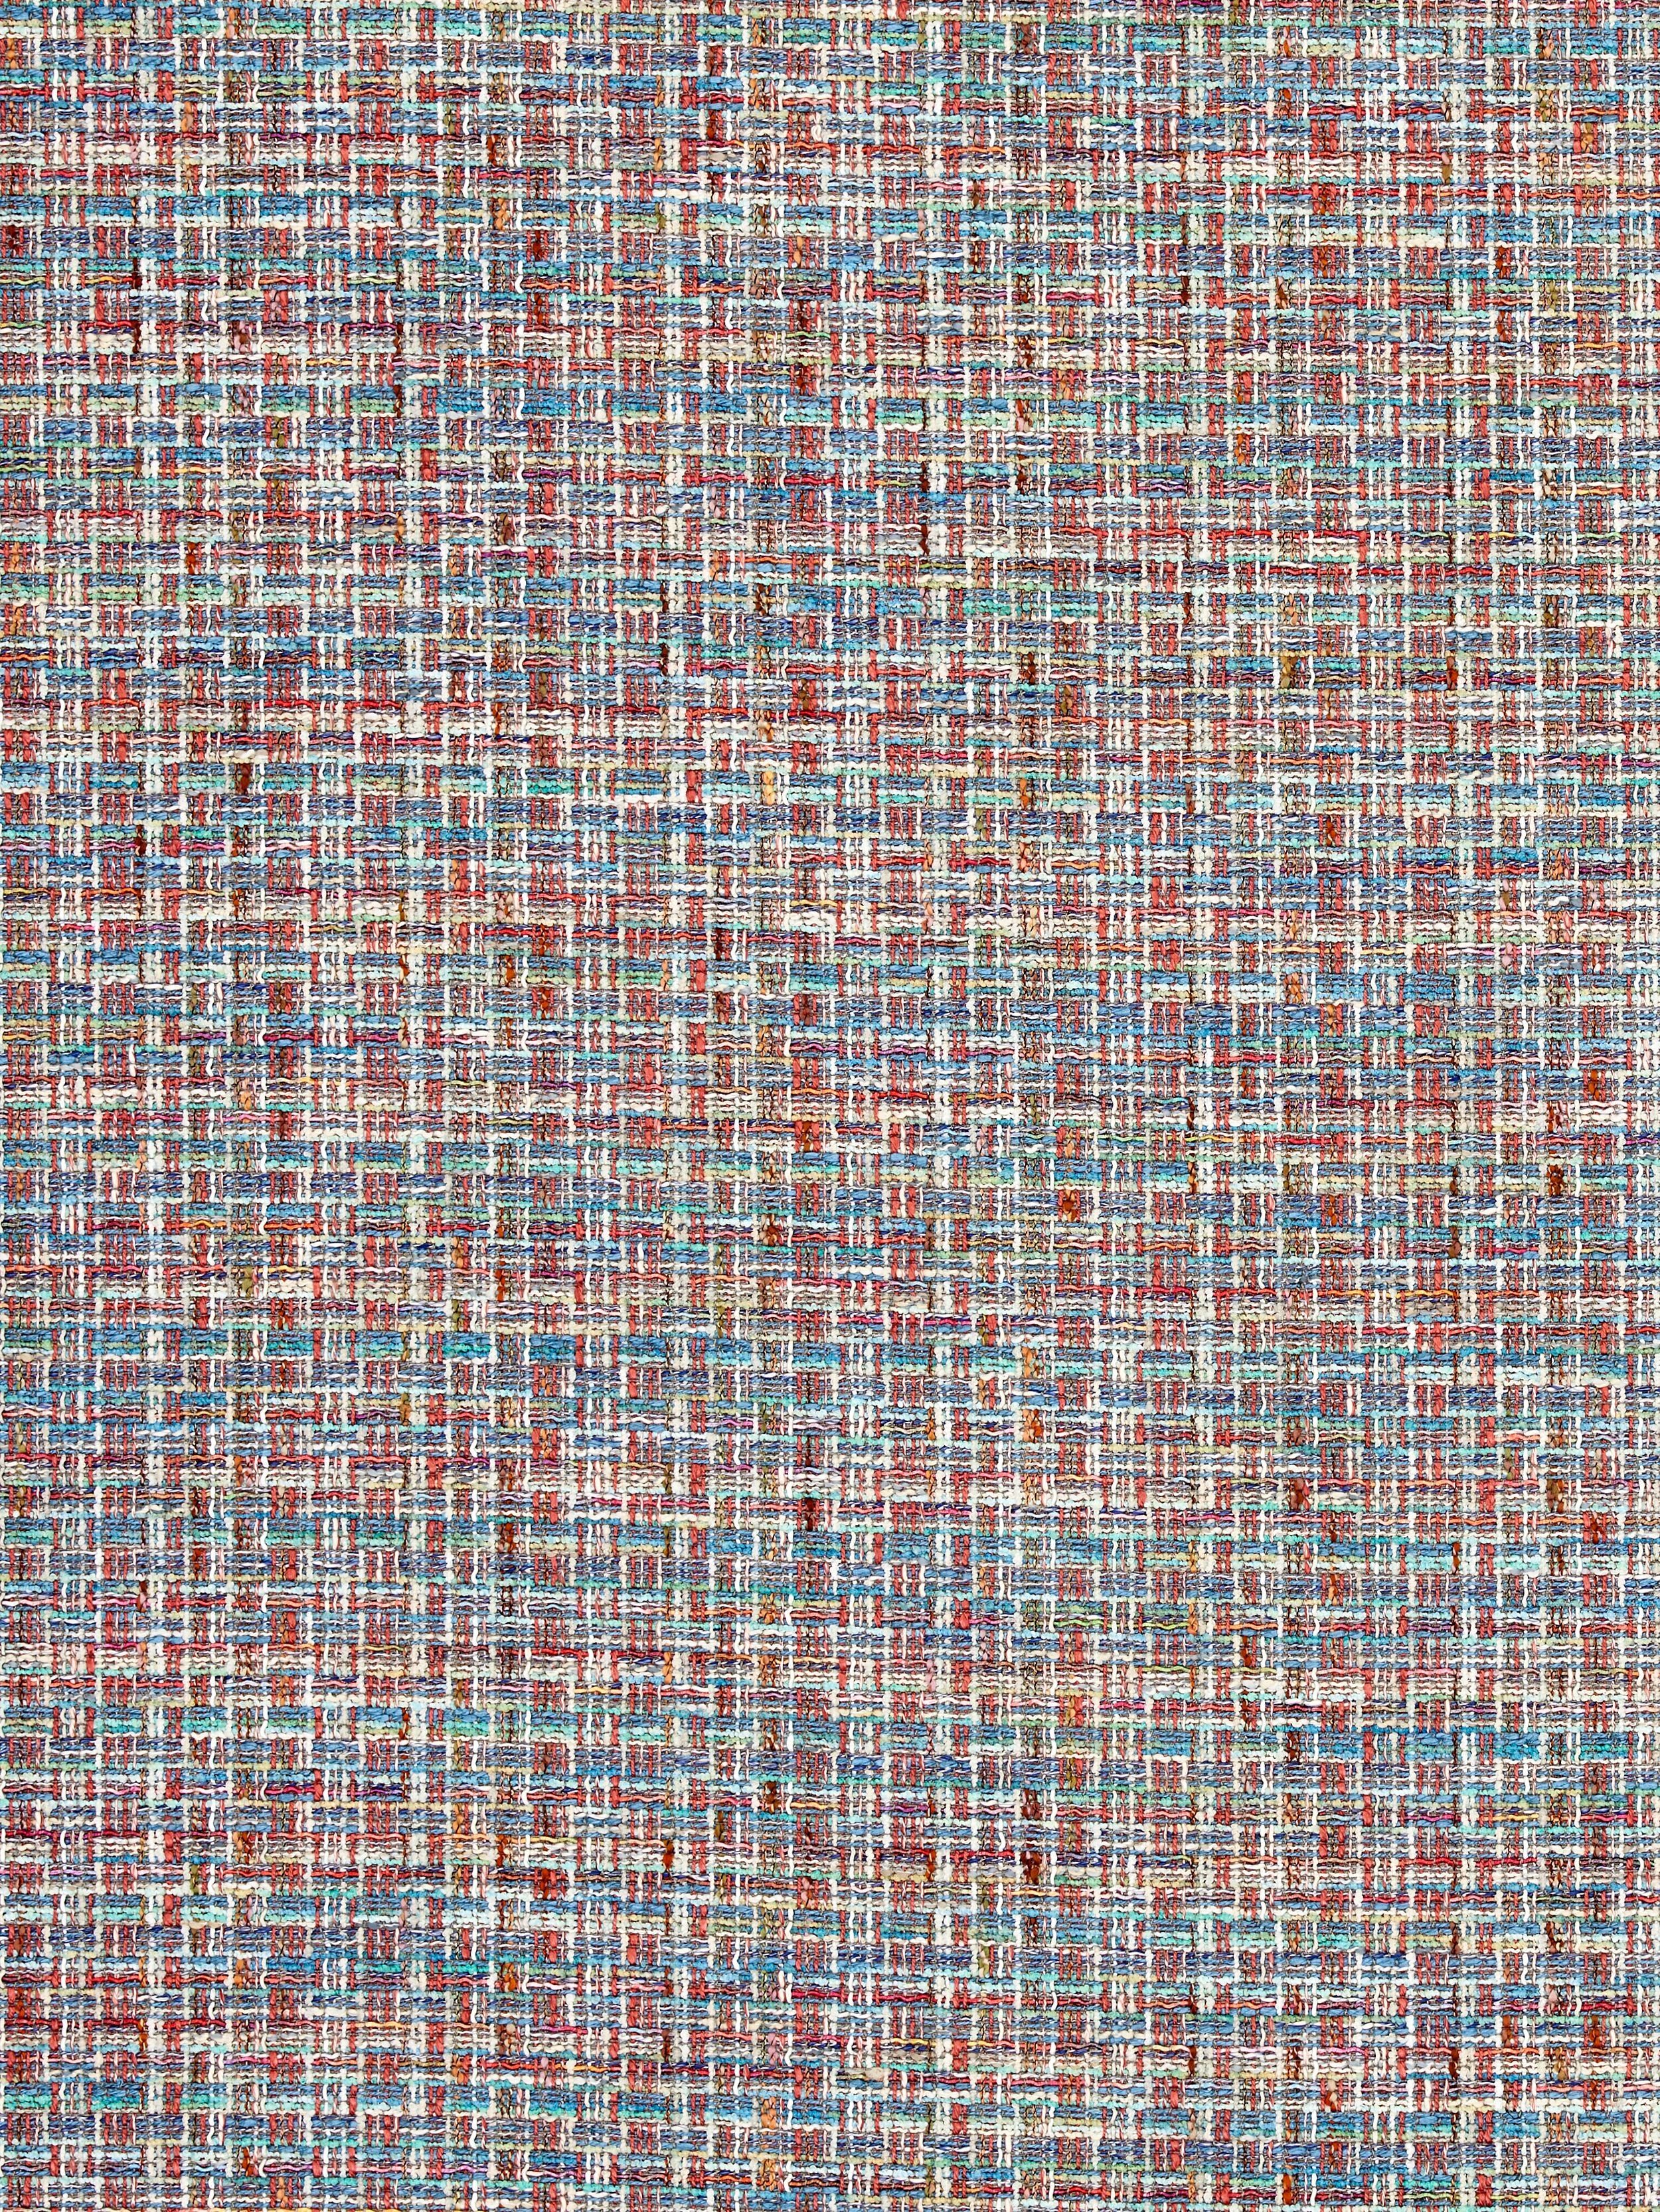 Faye fabric in confetti color - pattern number BI 0007FAYE - by Scalamandre in the Old World Weavers collection